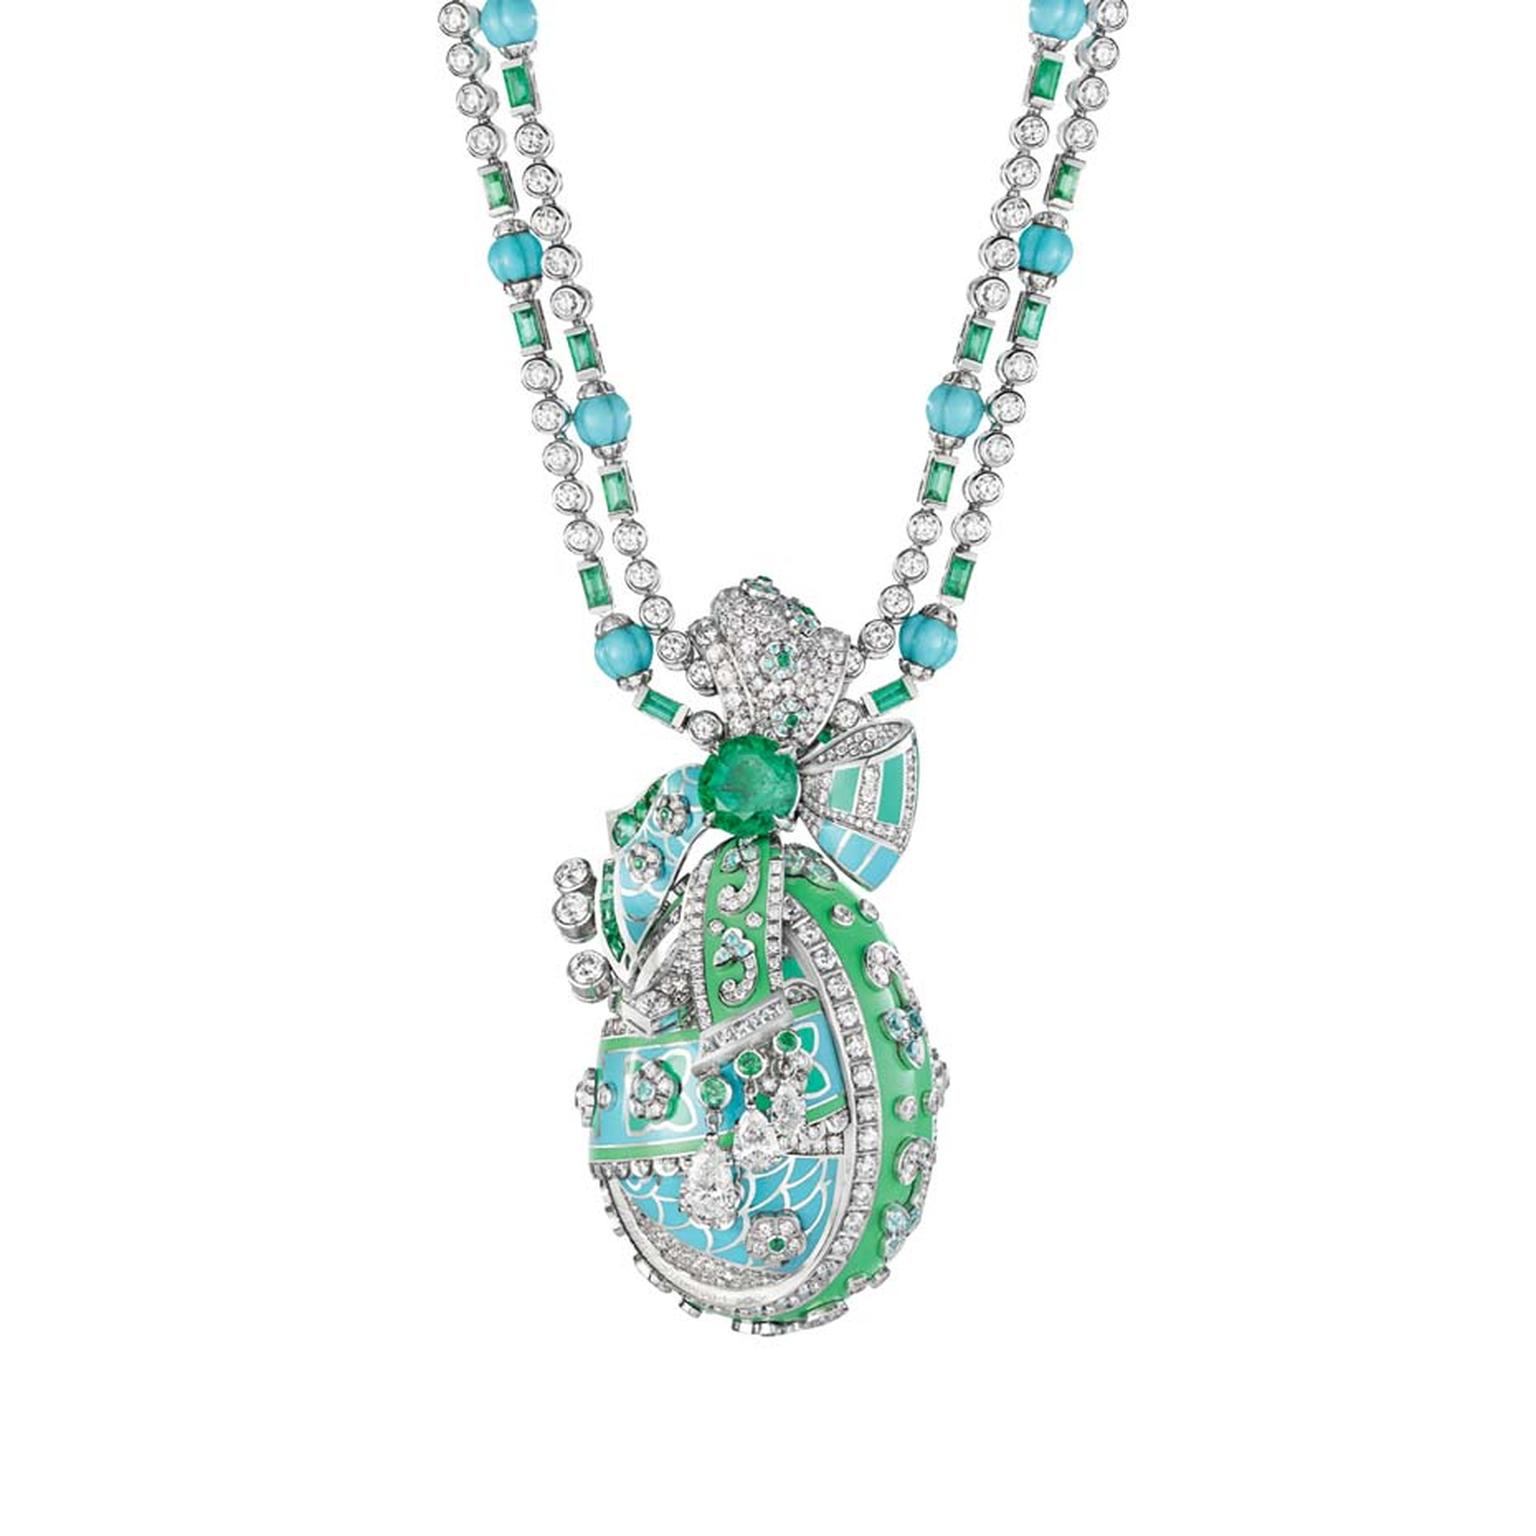 Baselworld 2015: the best high jewellery from Fabergé, Chopard, de